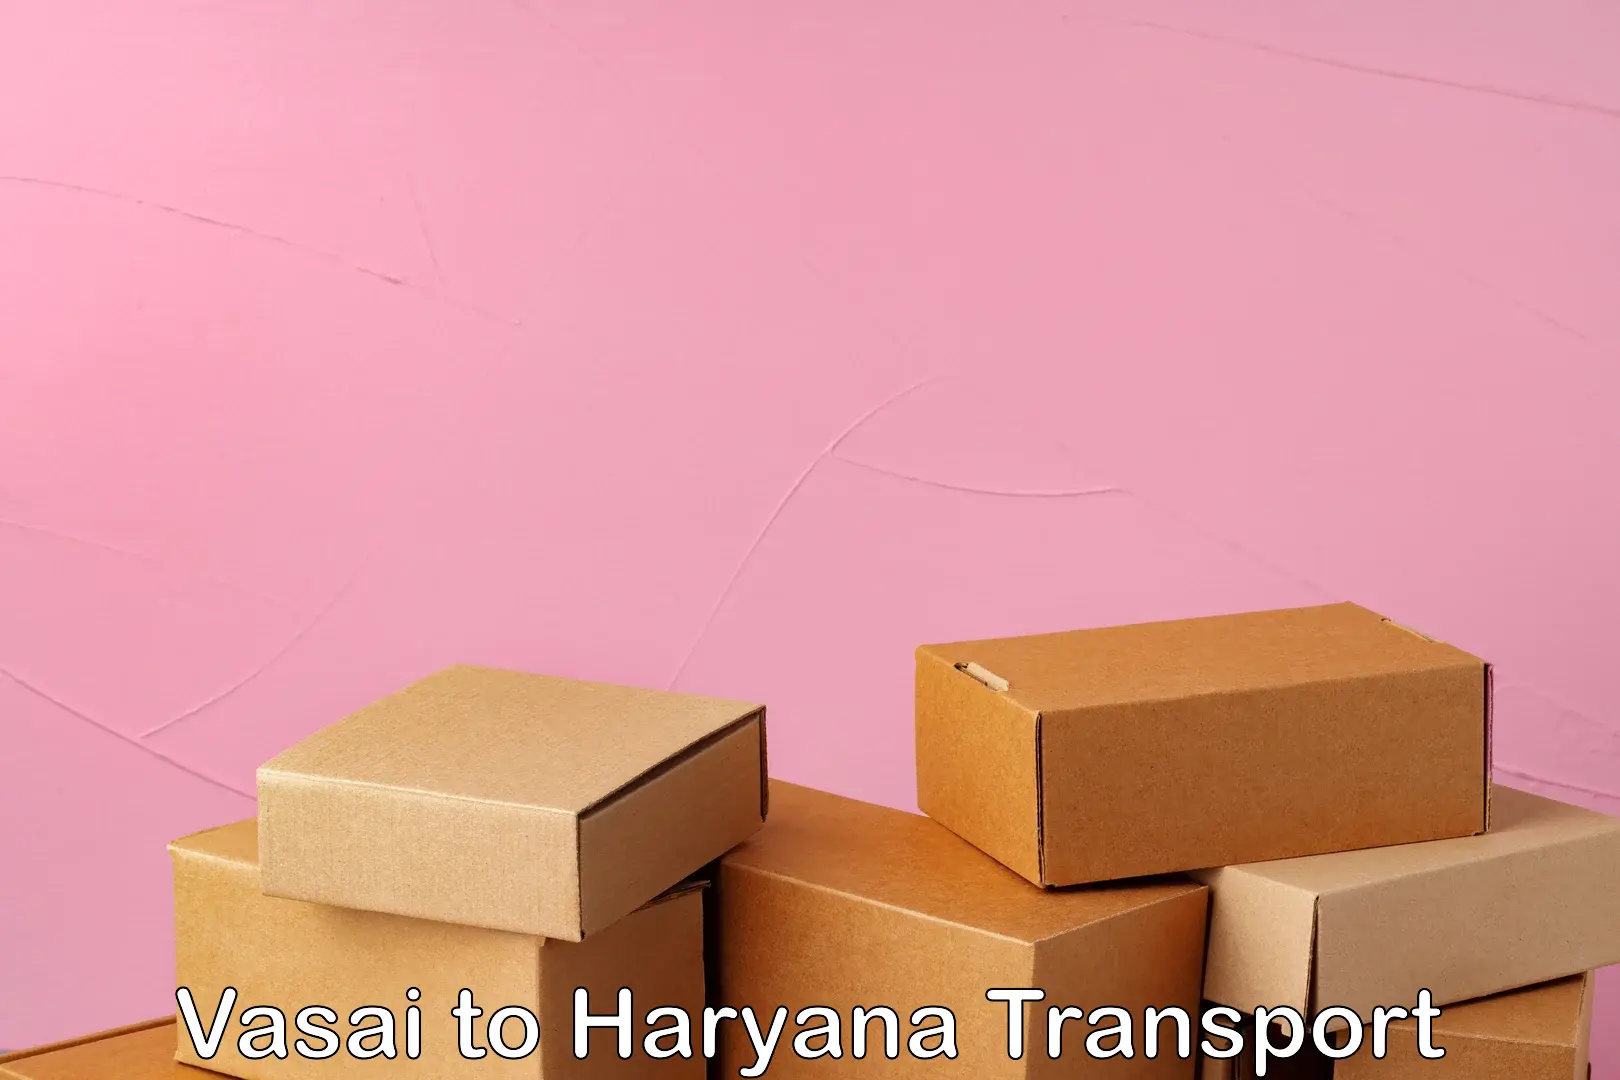 Commercial transport service Vasai to Haryana